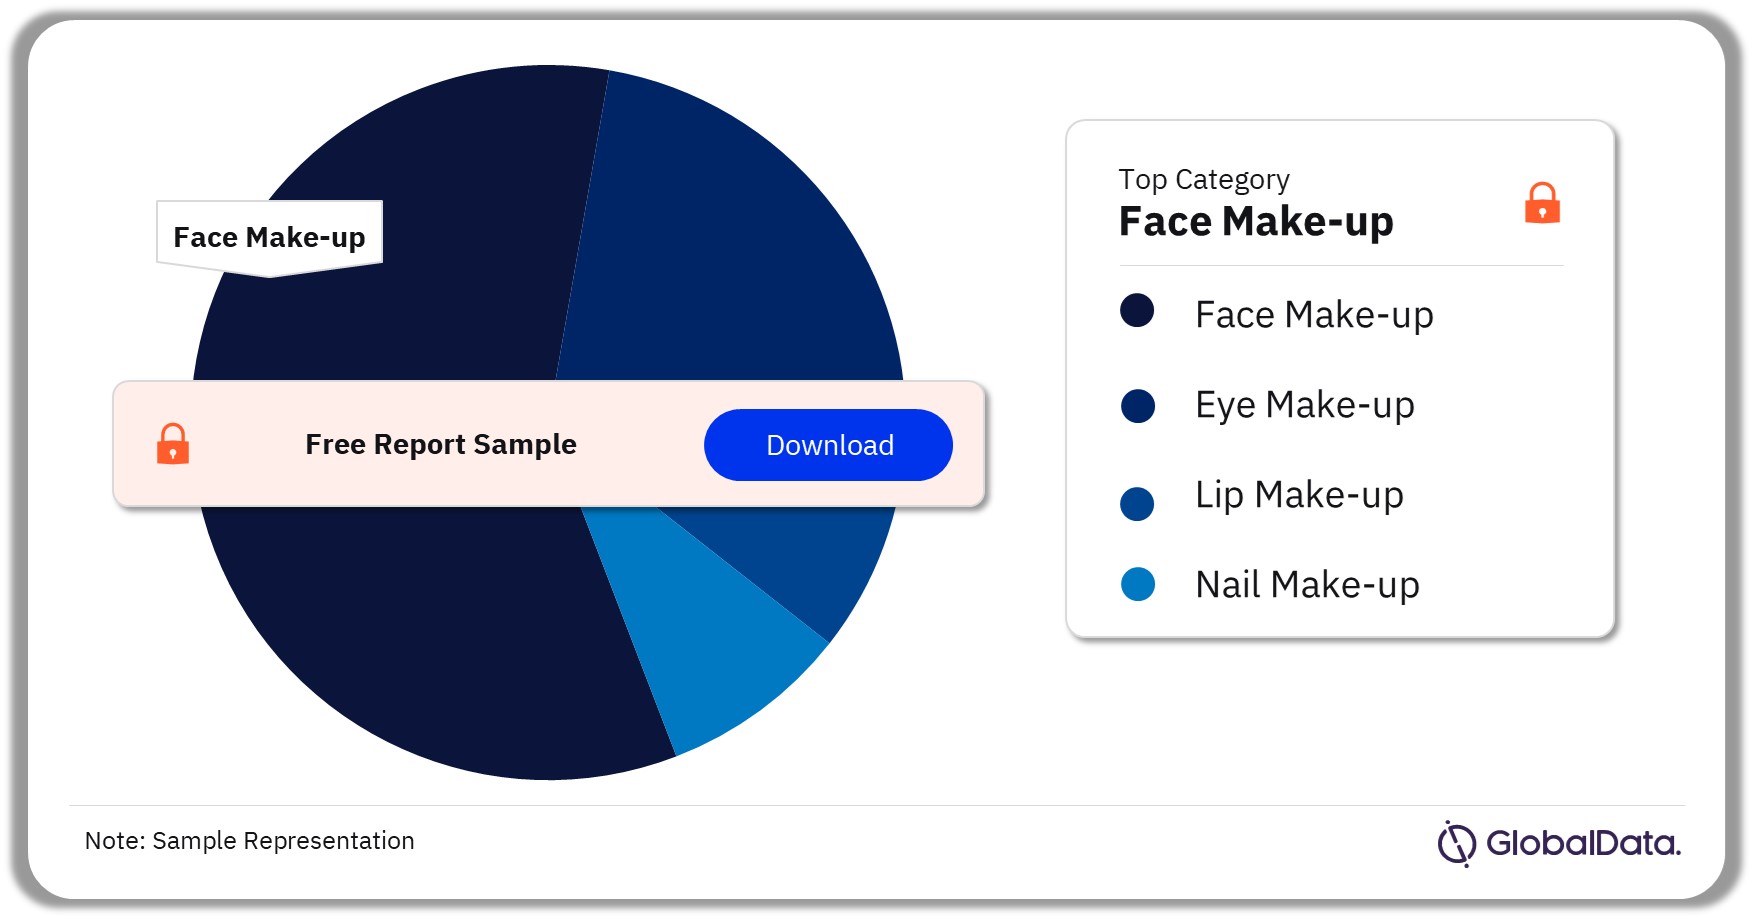 US Make-up Market Analysis by Categories, 2021 (%)